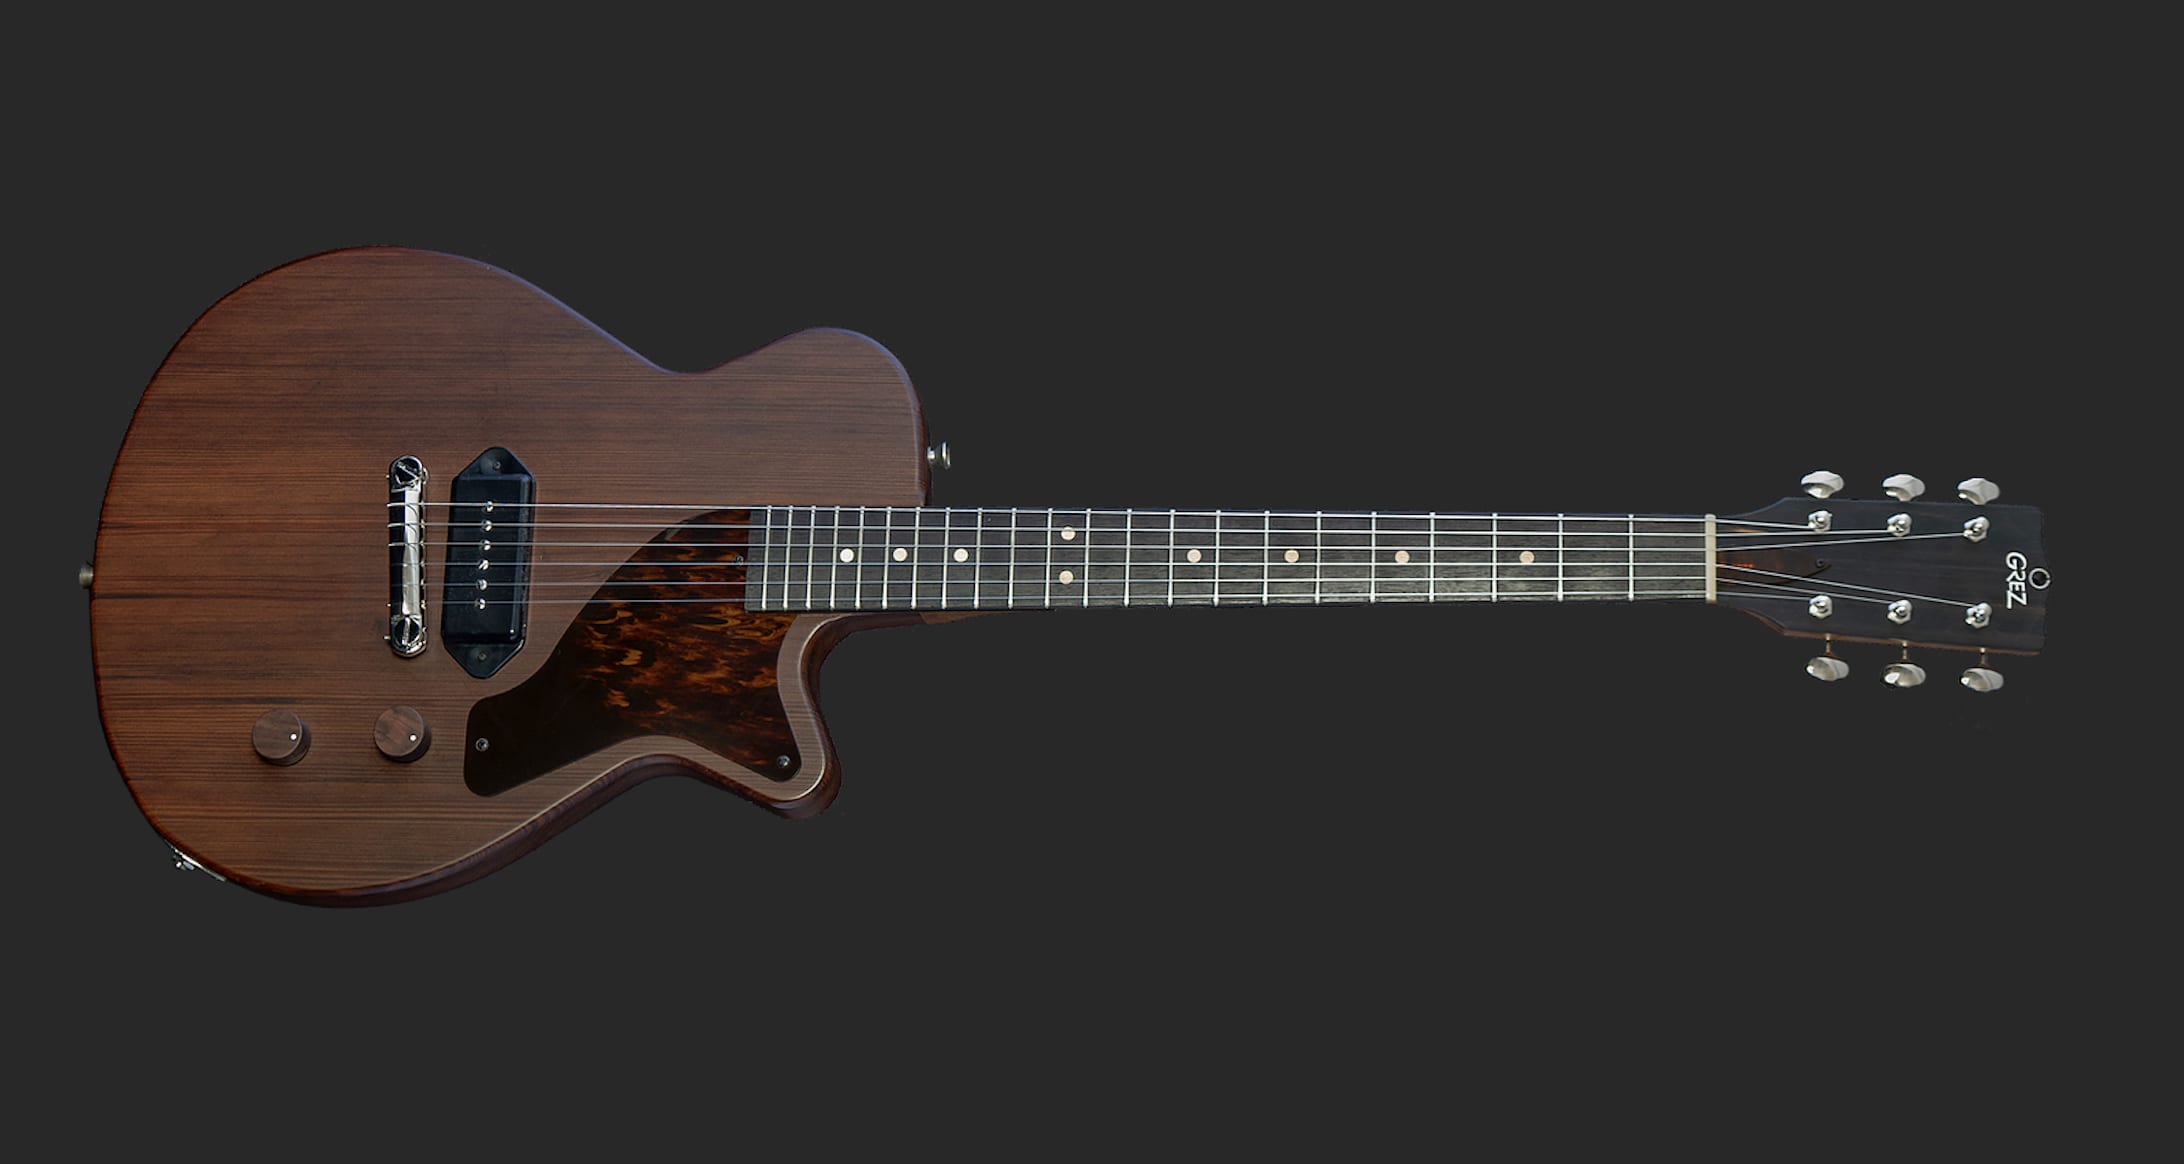 Grez Guitars Mendocino Junior crafted from 100-year-old redwood